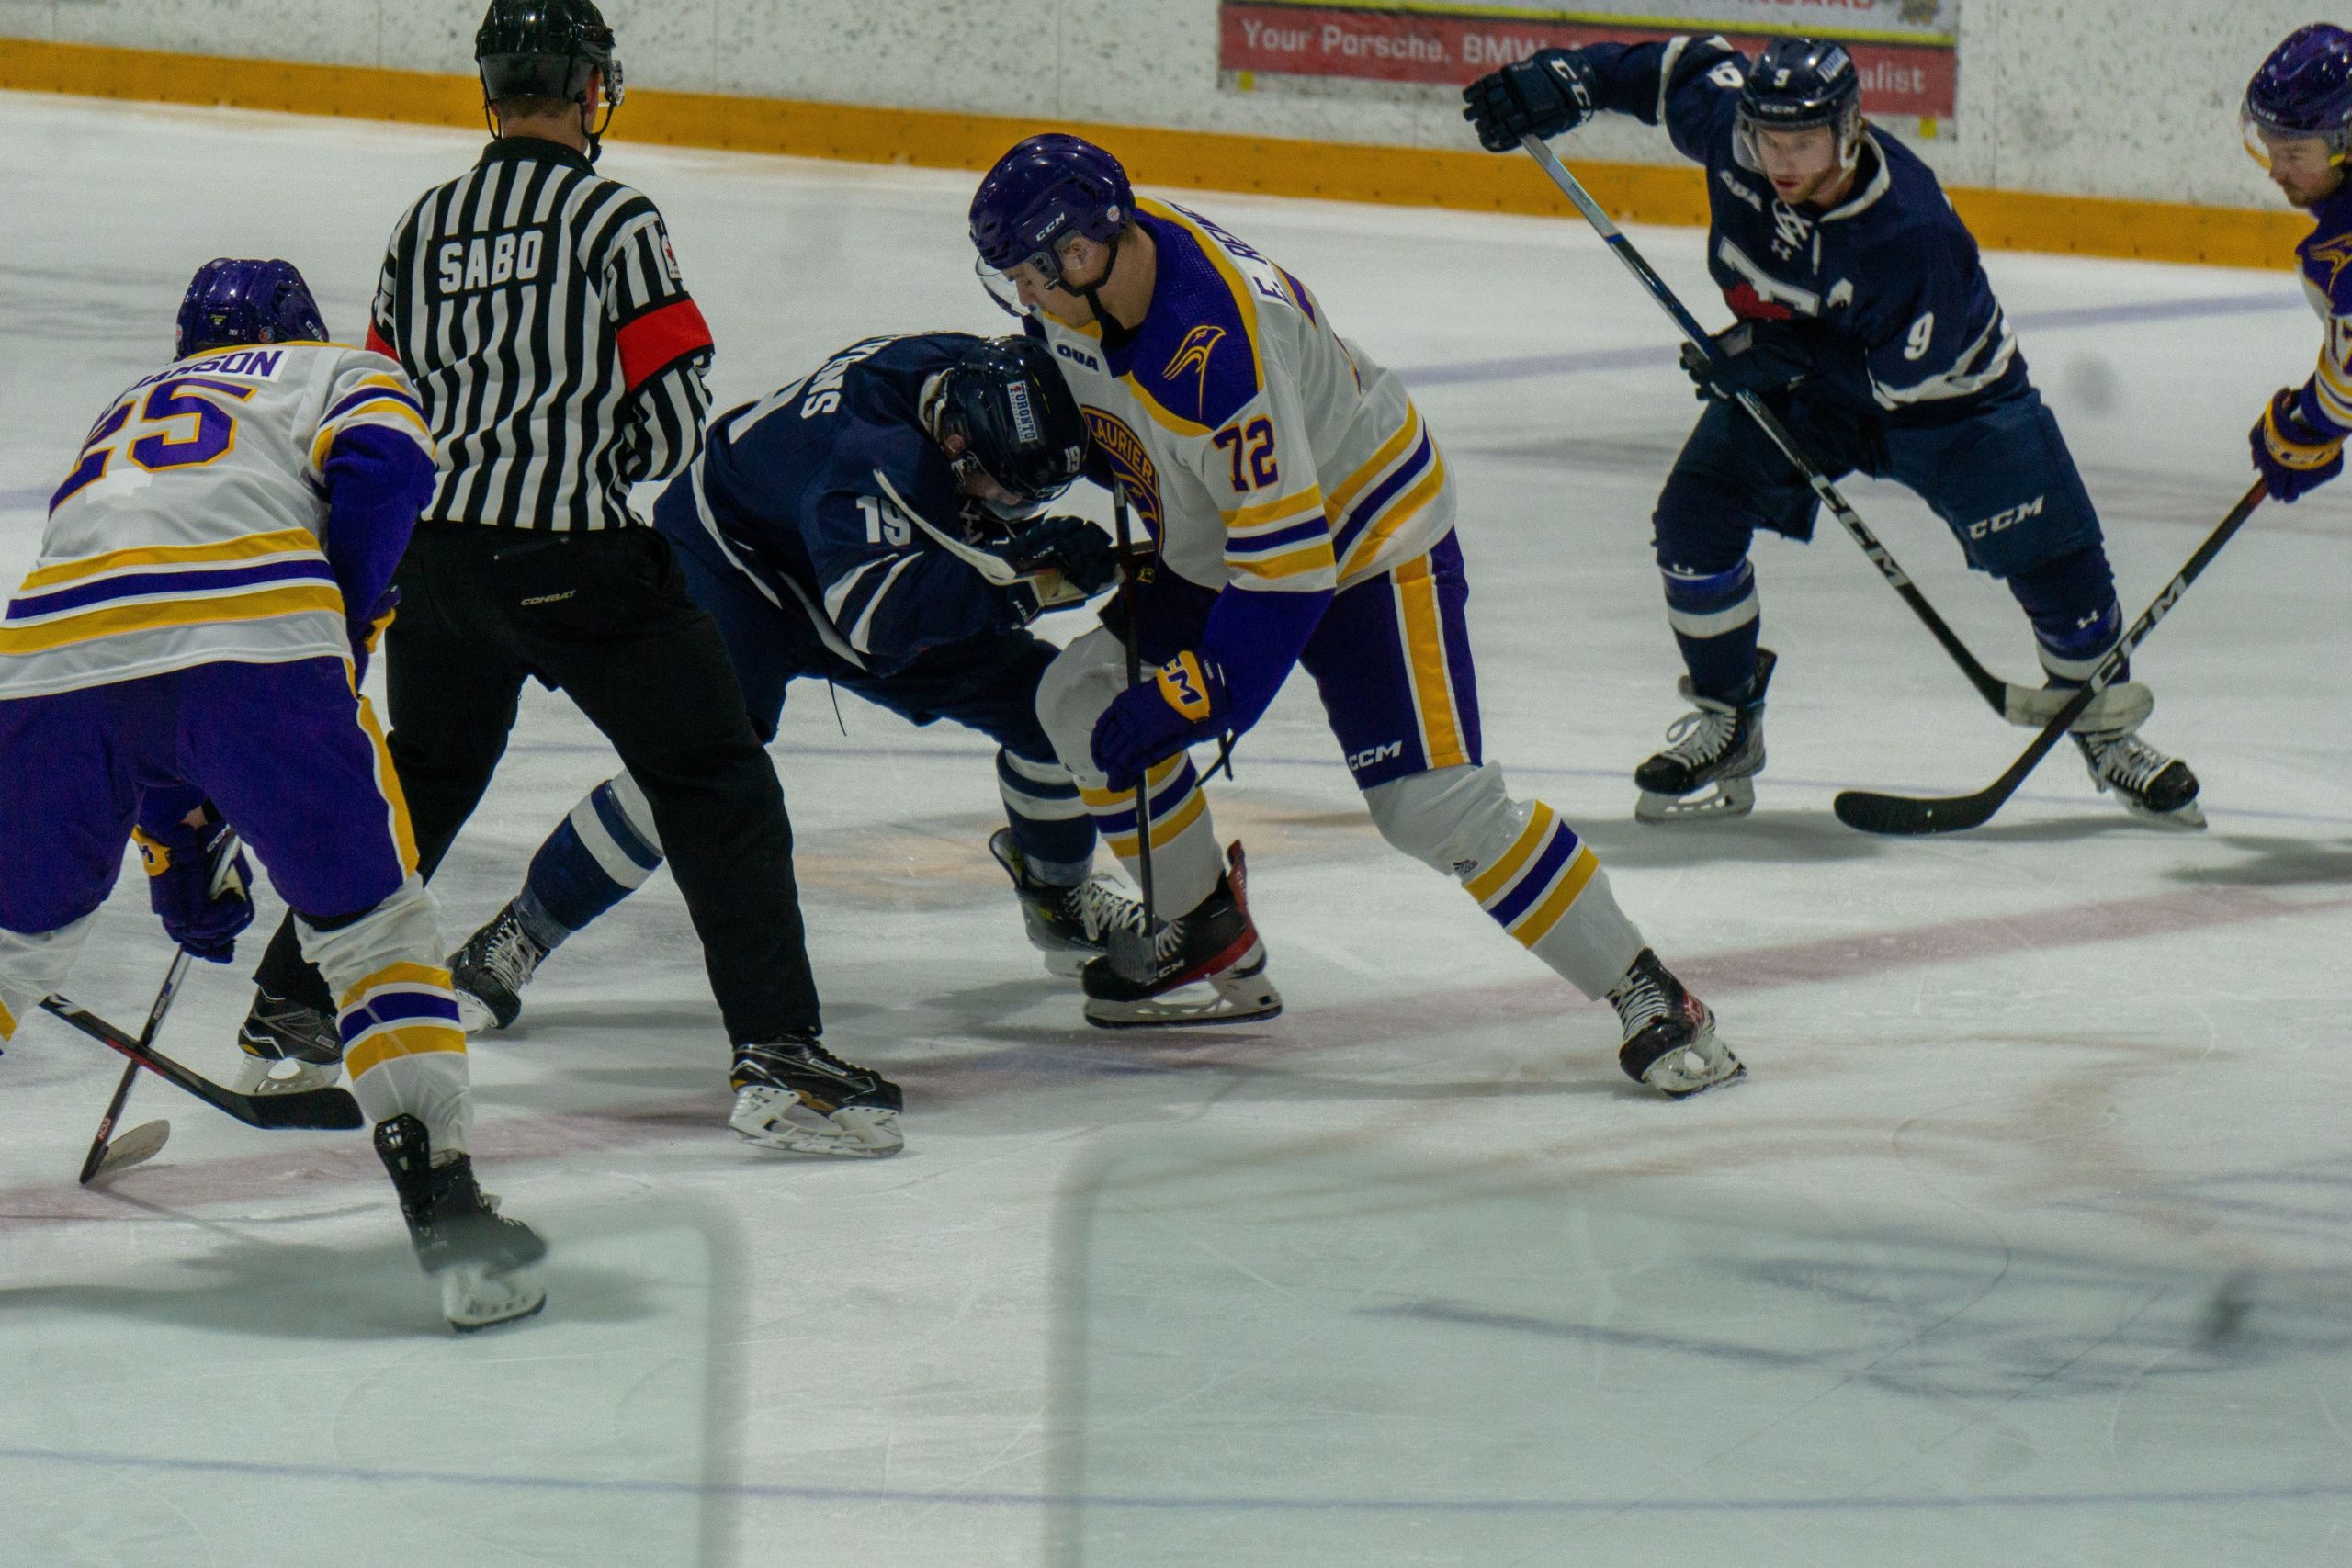 Laurier Men's Hockey player on the ice mid game